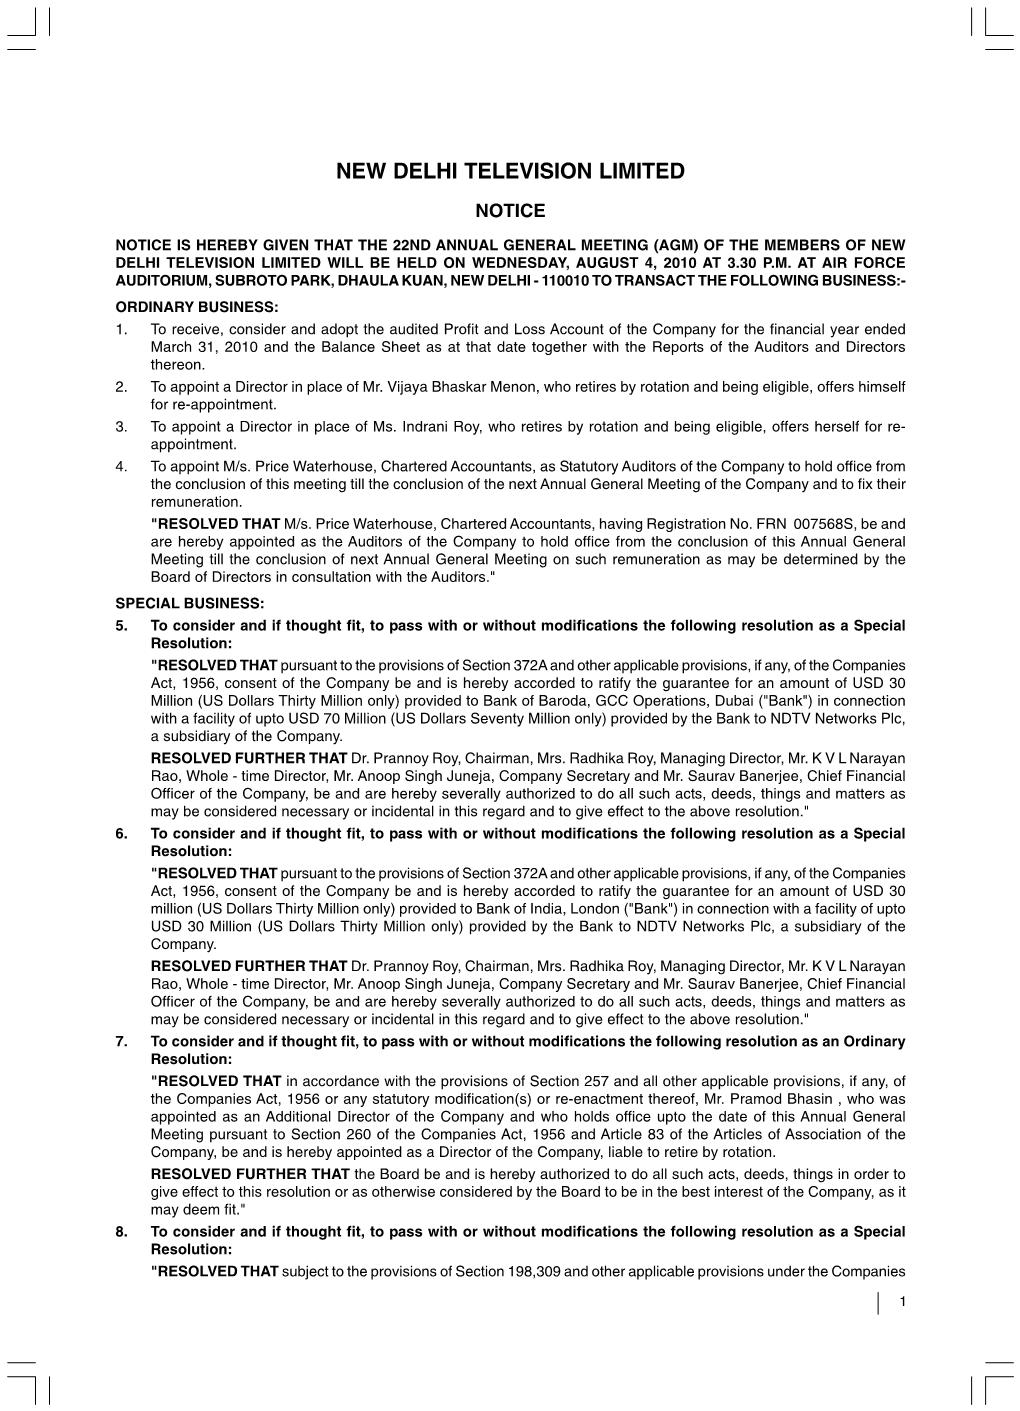 Annual General Meeting Notice 2010